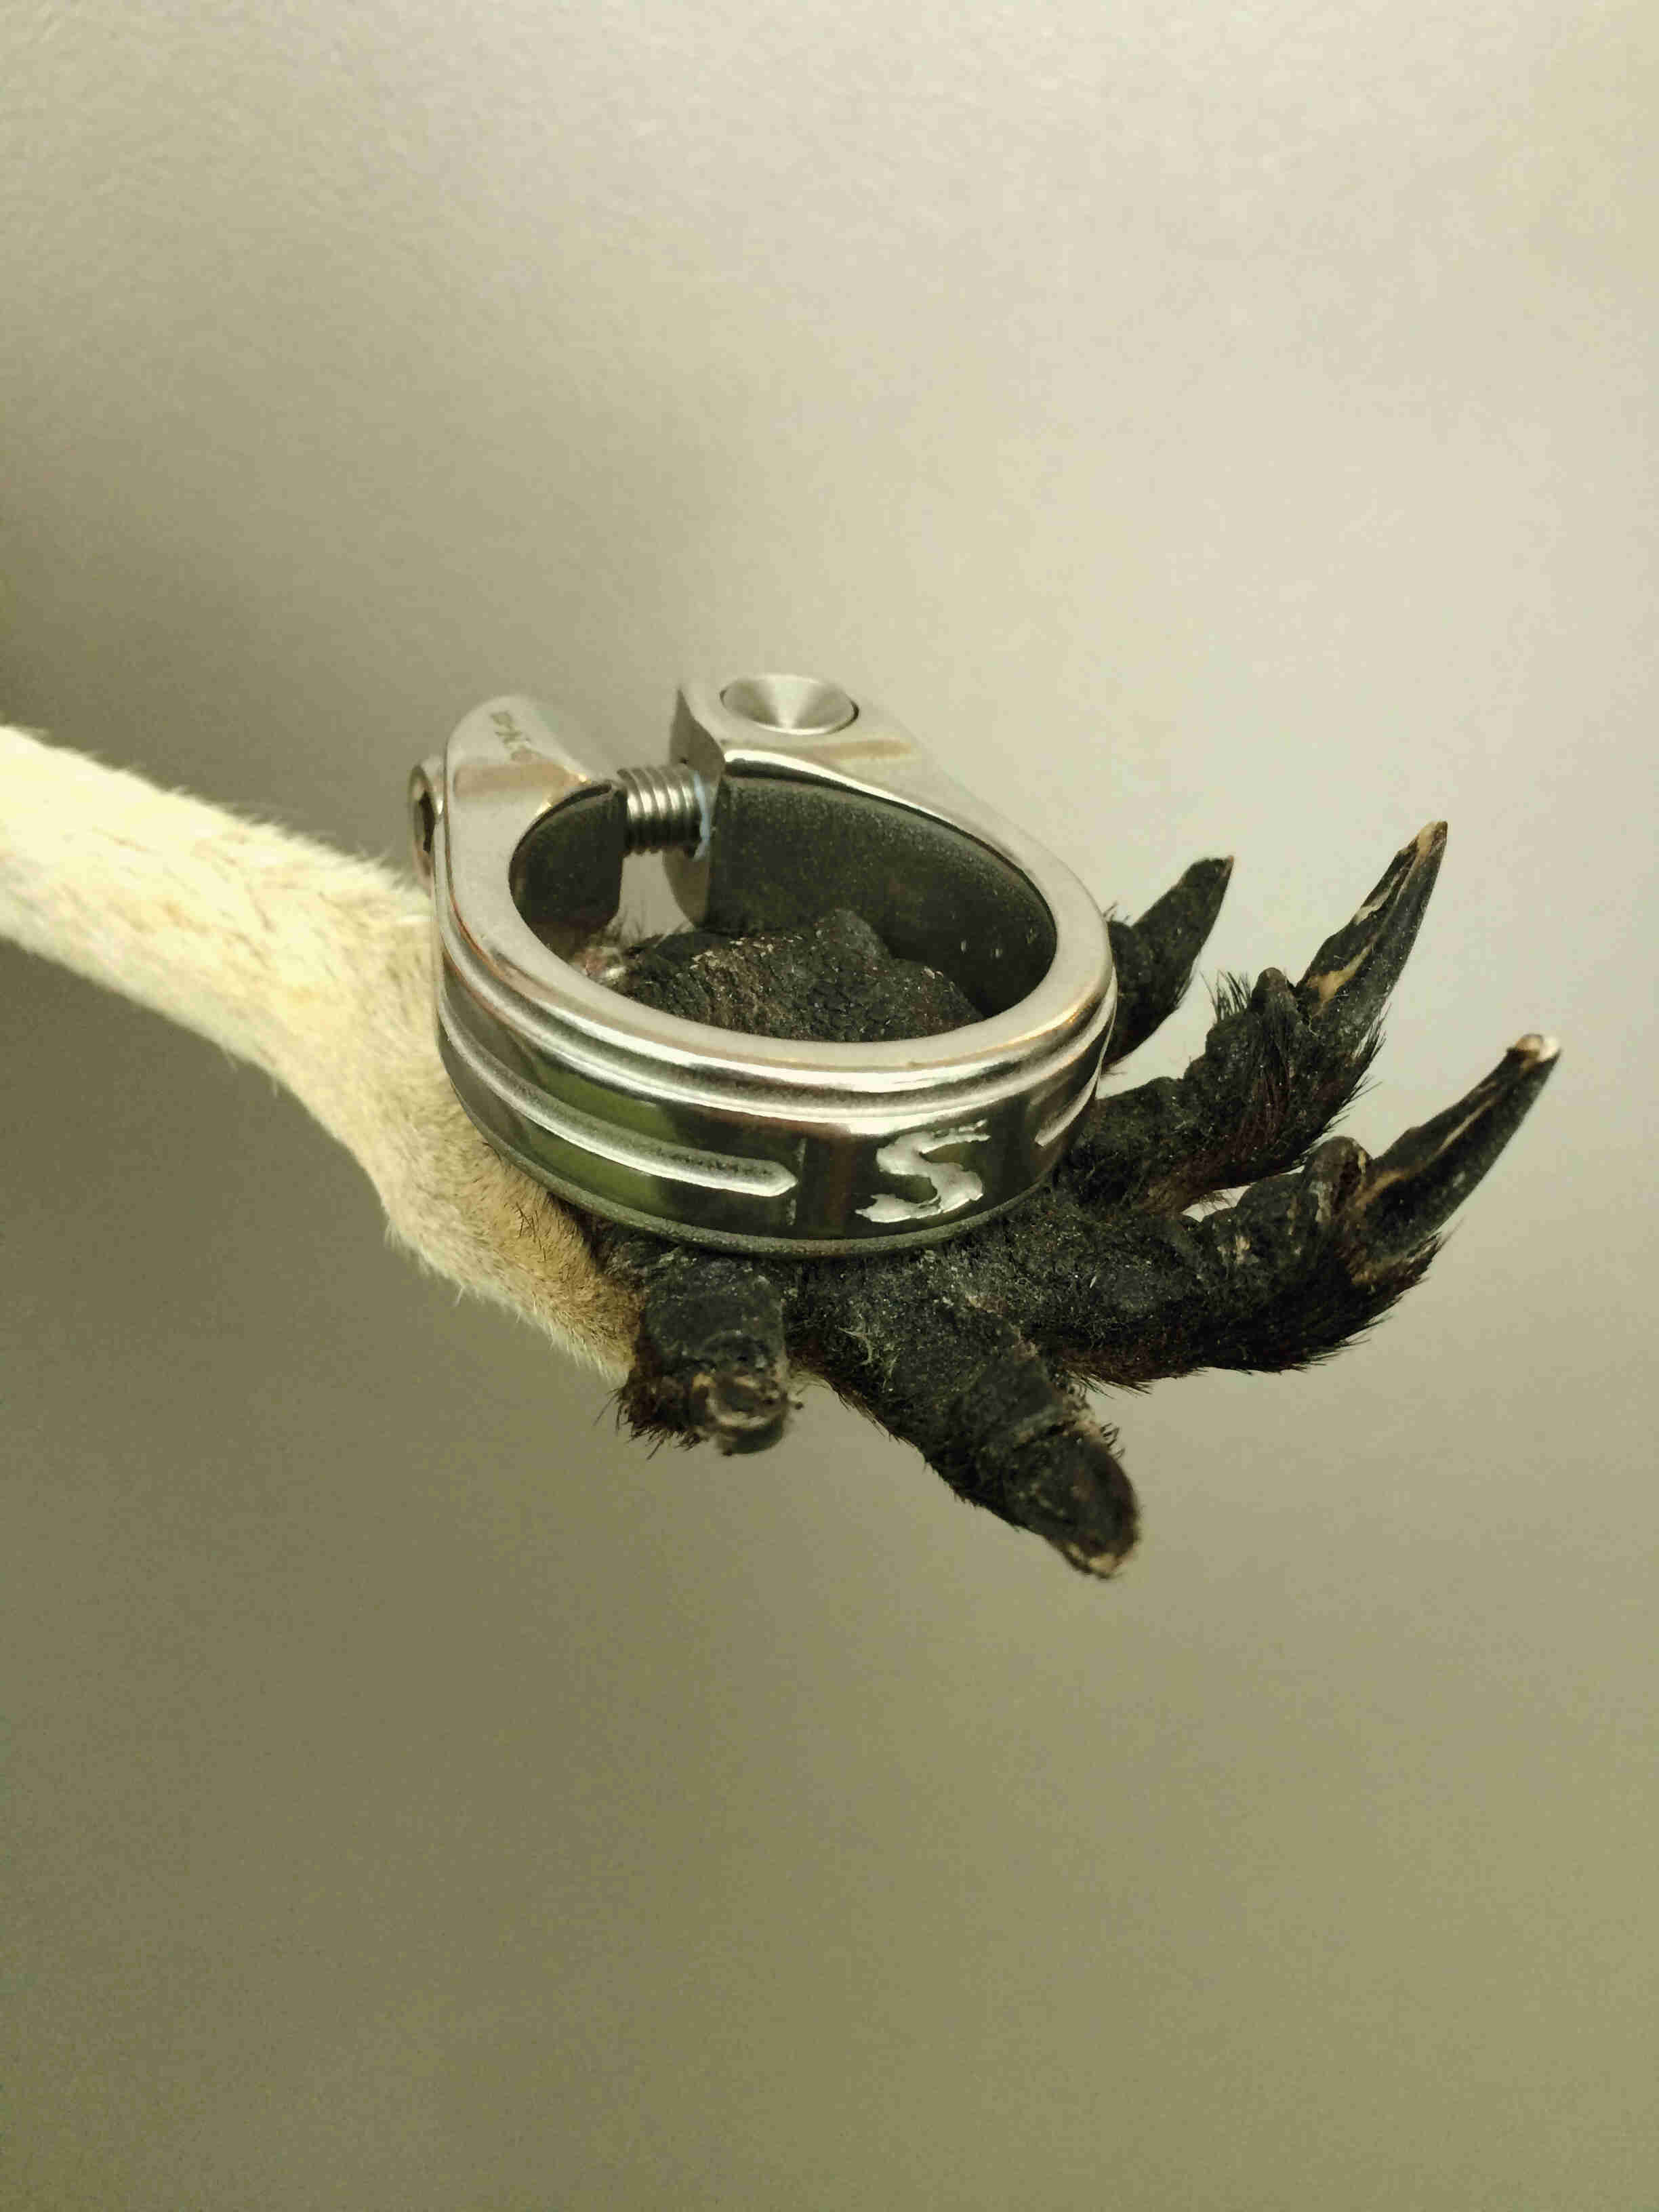 A stainless steel Surly Bikes seat collar, set on top of the paw of some type of taxidermied animal